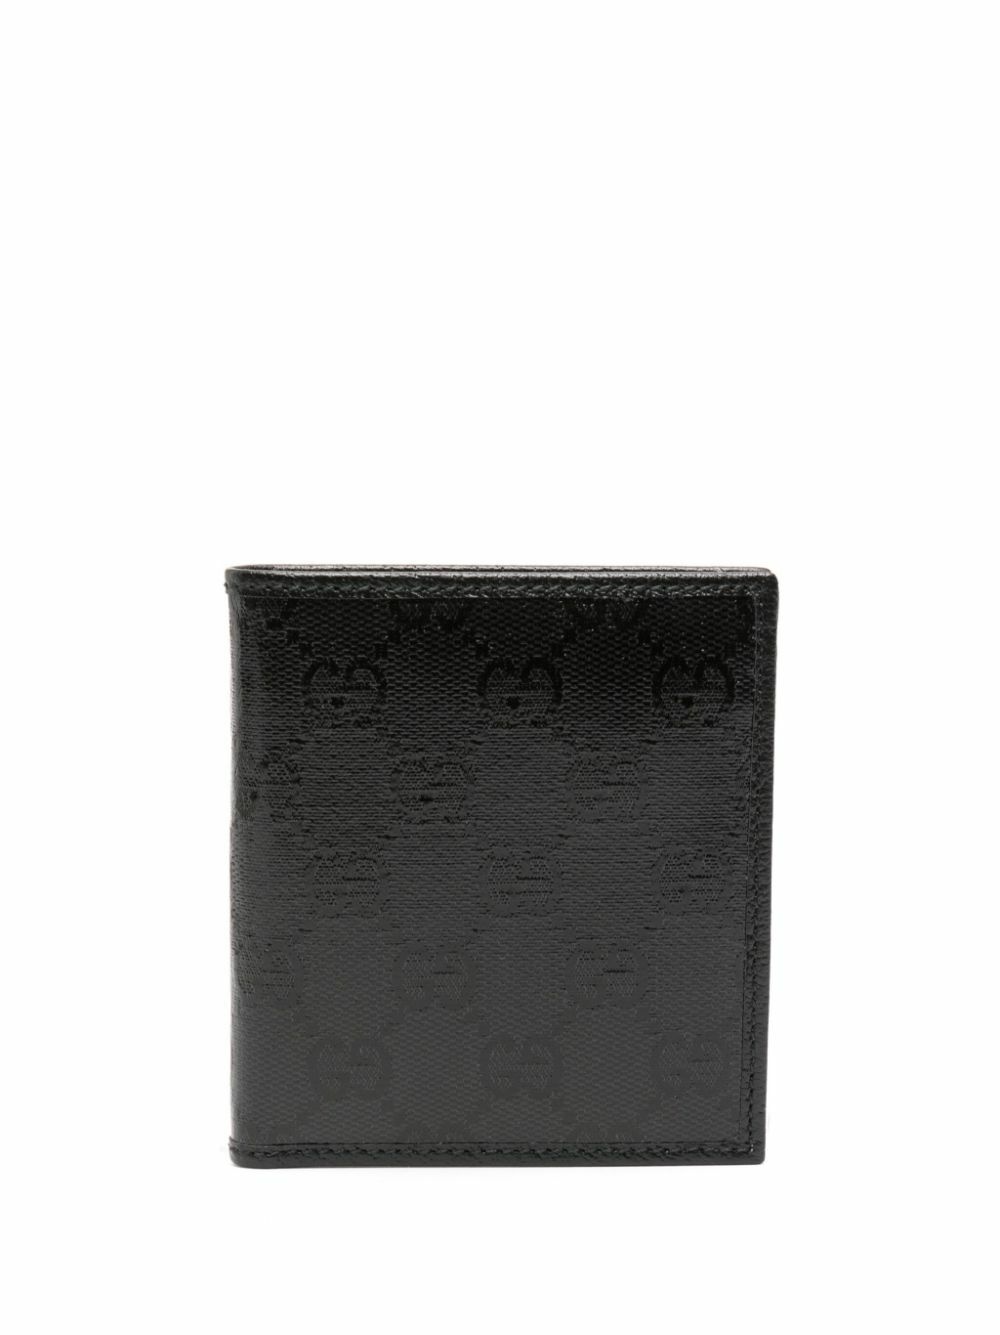 GUCCI - Leather Wallet Gucci